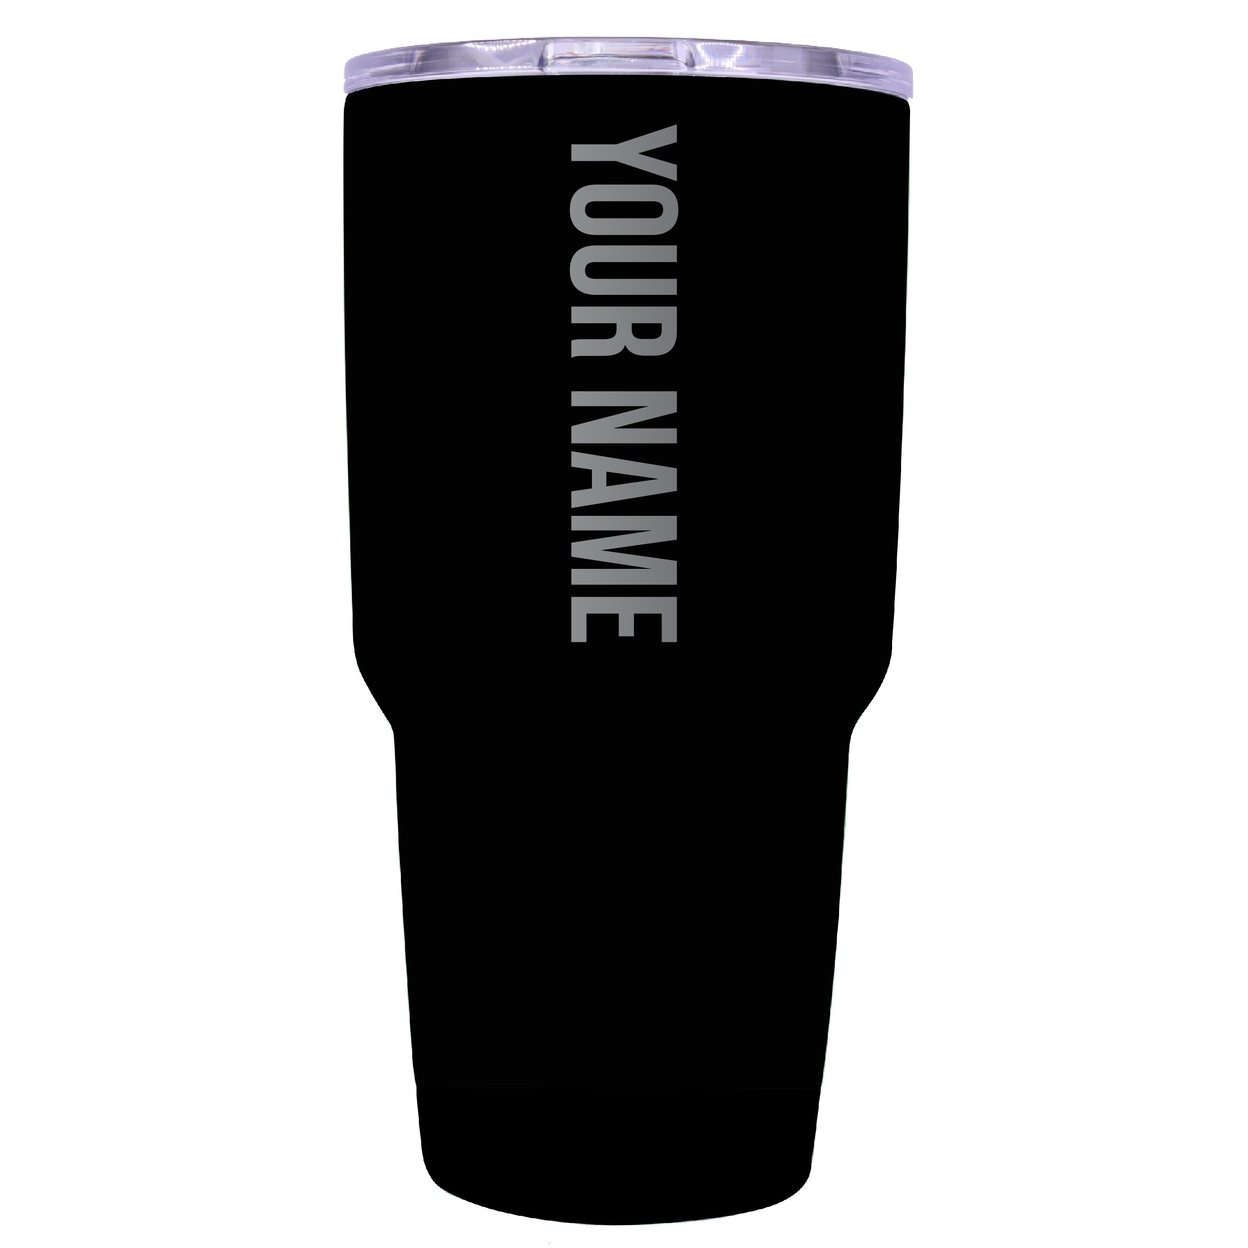 Customizable Laser Etched 24 Oz Insulated Stainless Steel Tumbler Personalized With Custom Name Or Message - Seafoam, Single